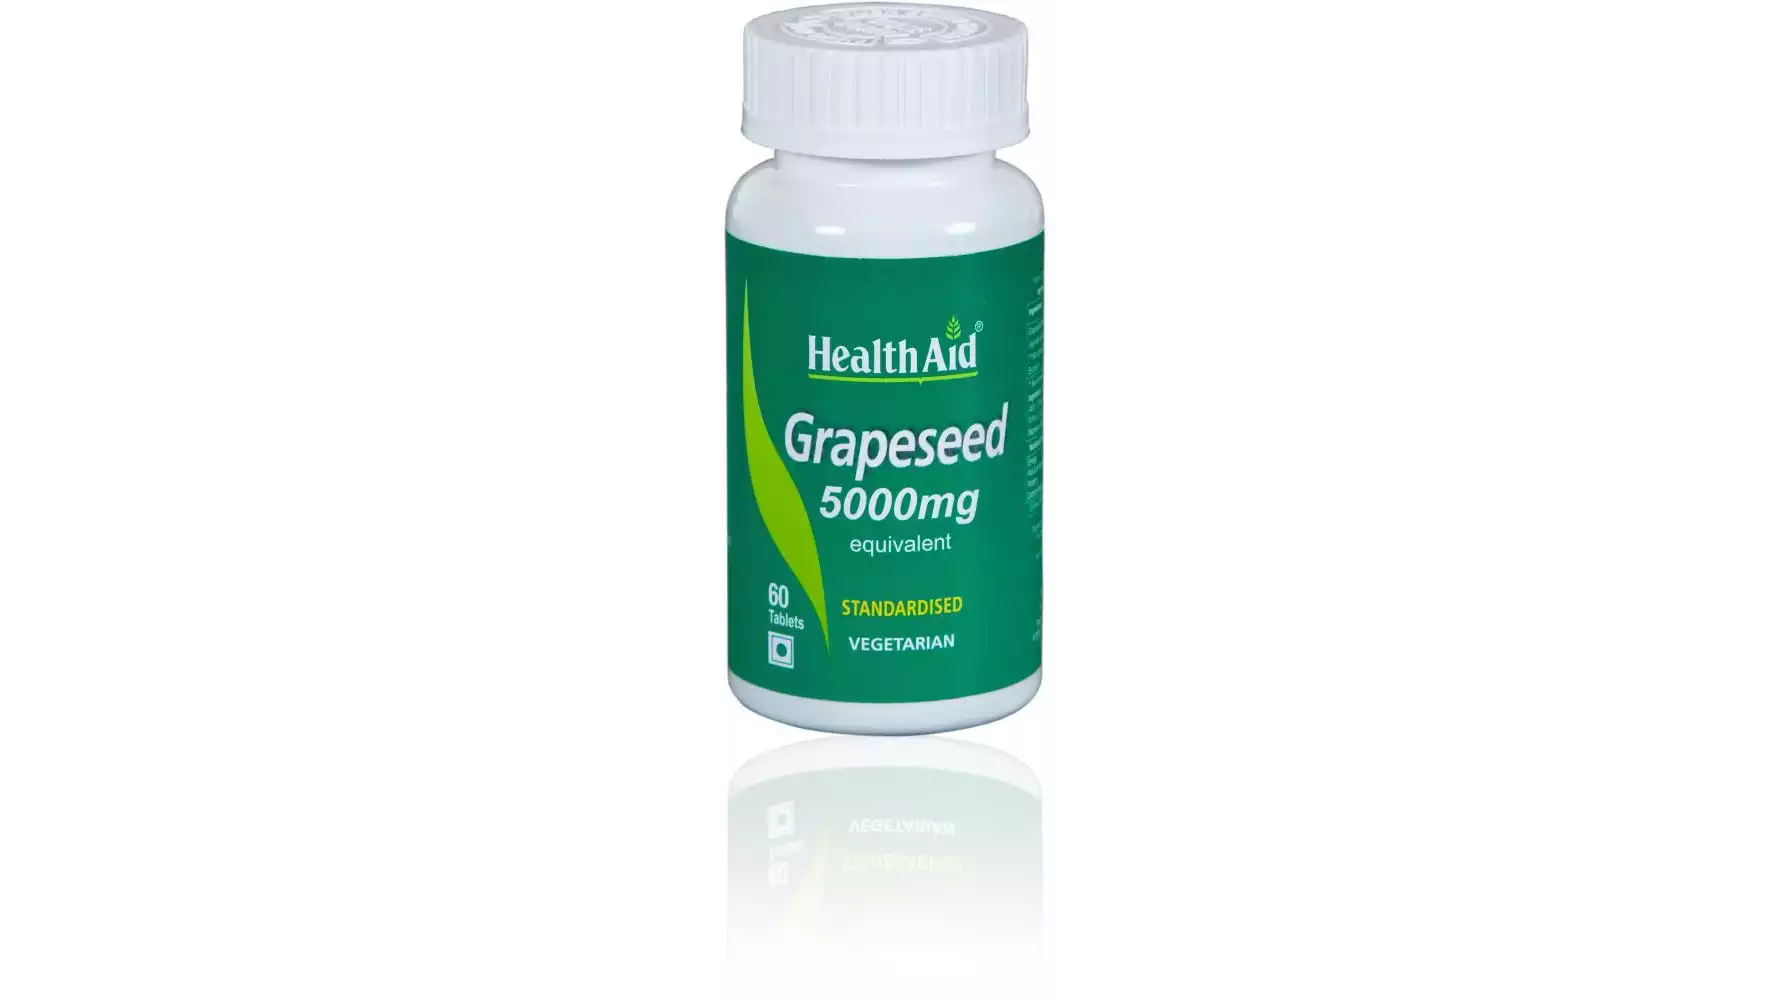 HealthAid Grapeseed Extract 5000Mg (Equivalent) Tablets (60tab)